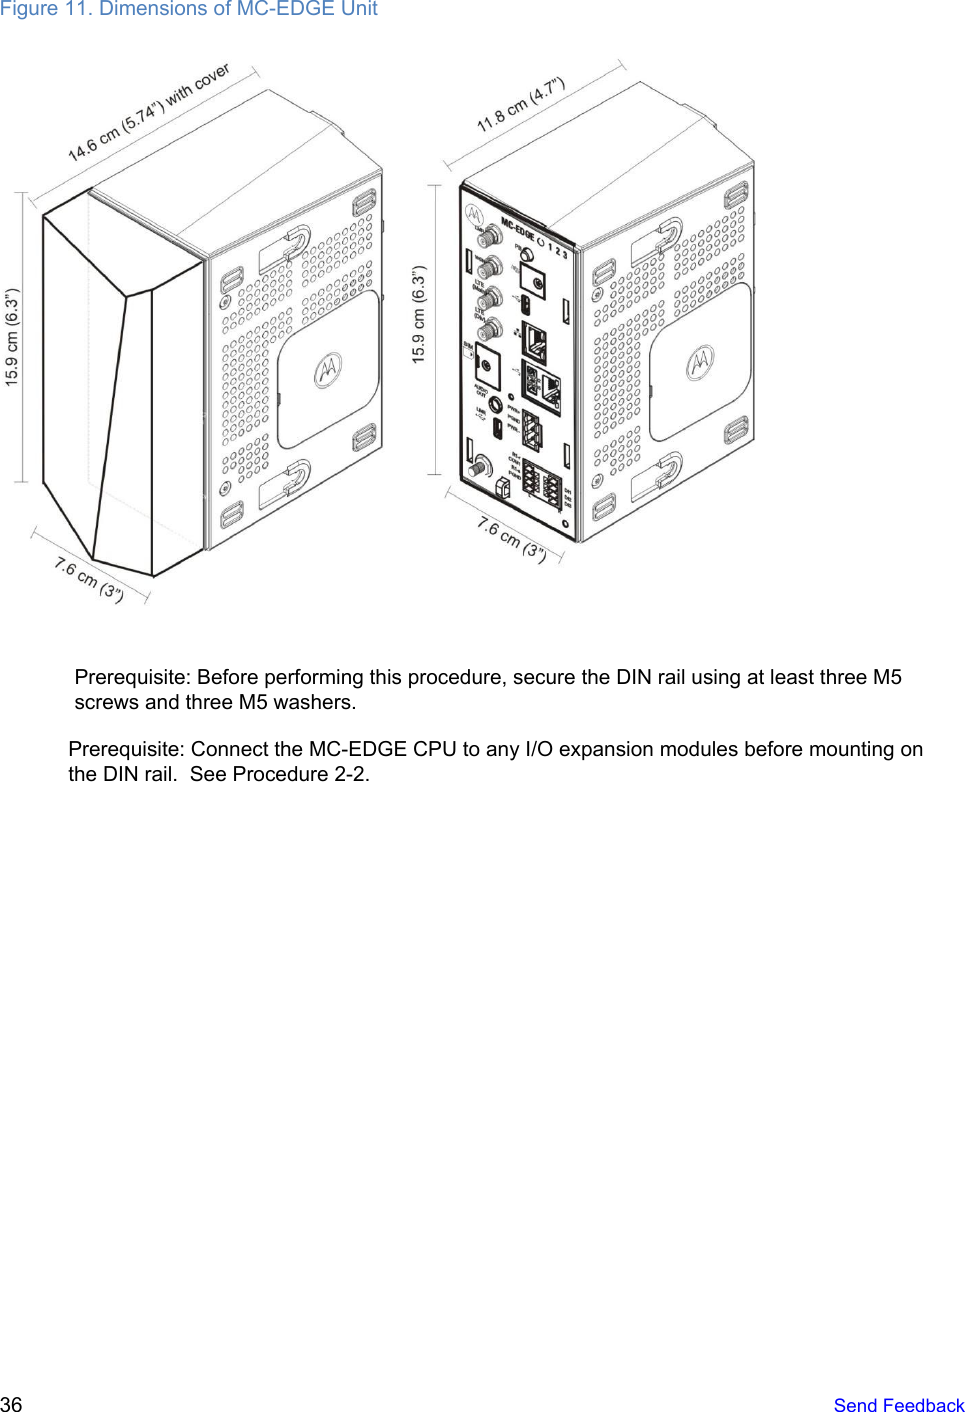  Figure 11. Dimensions of MC-EDGE Unit   Prerequisite: Before performing this procedure, secure the DIN rail using at least three M5 screws and three M5 washers. Prerequisite: Connect the MC-EDGE CPU to any I/O expansion modules before mounting on the DIN rail.  See Procedure 2-2.   36   Send Feedback  